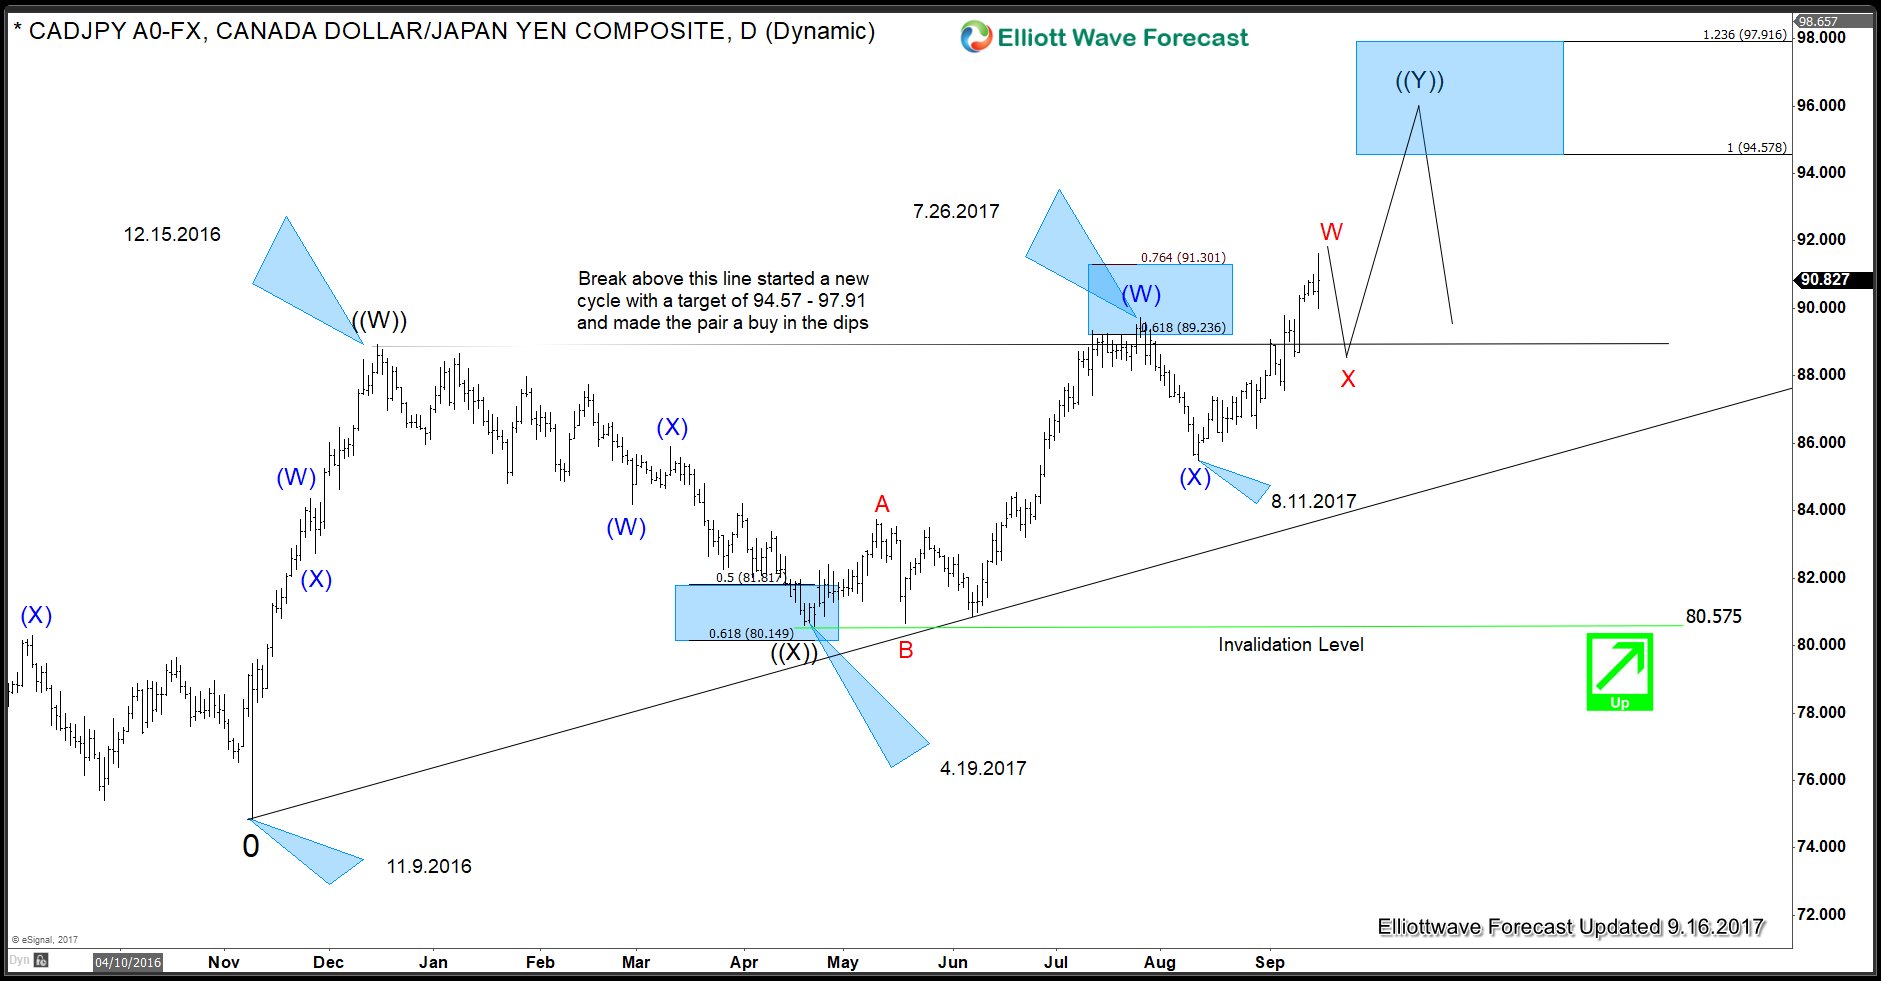 CADJPY Elliott Wave Sequence in daily chart 